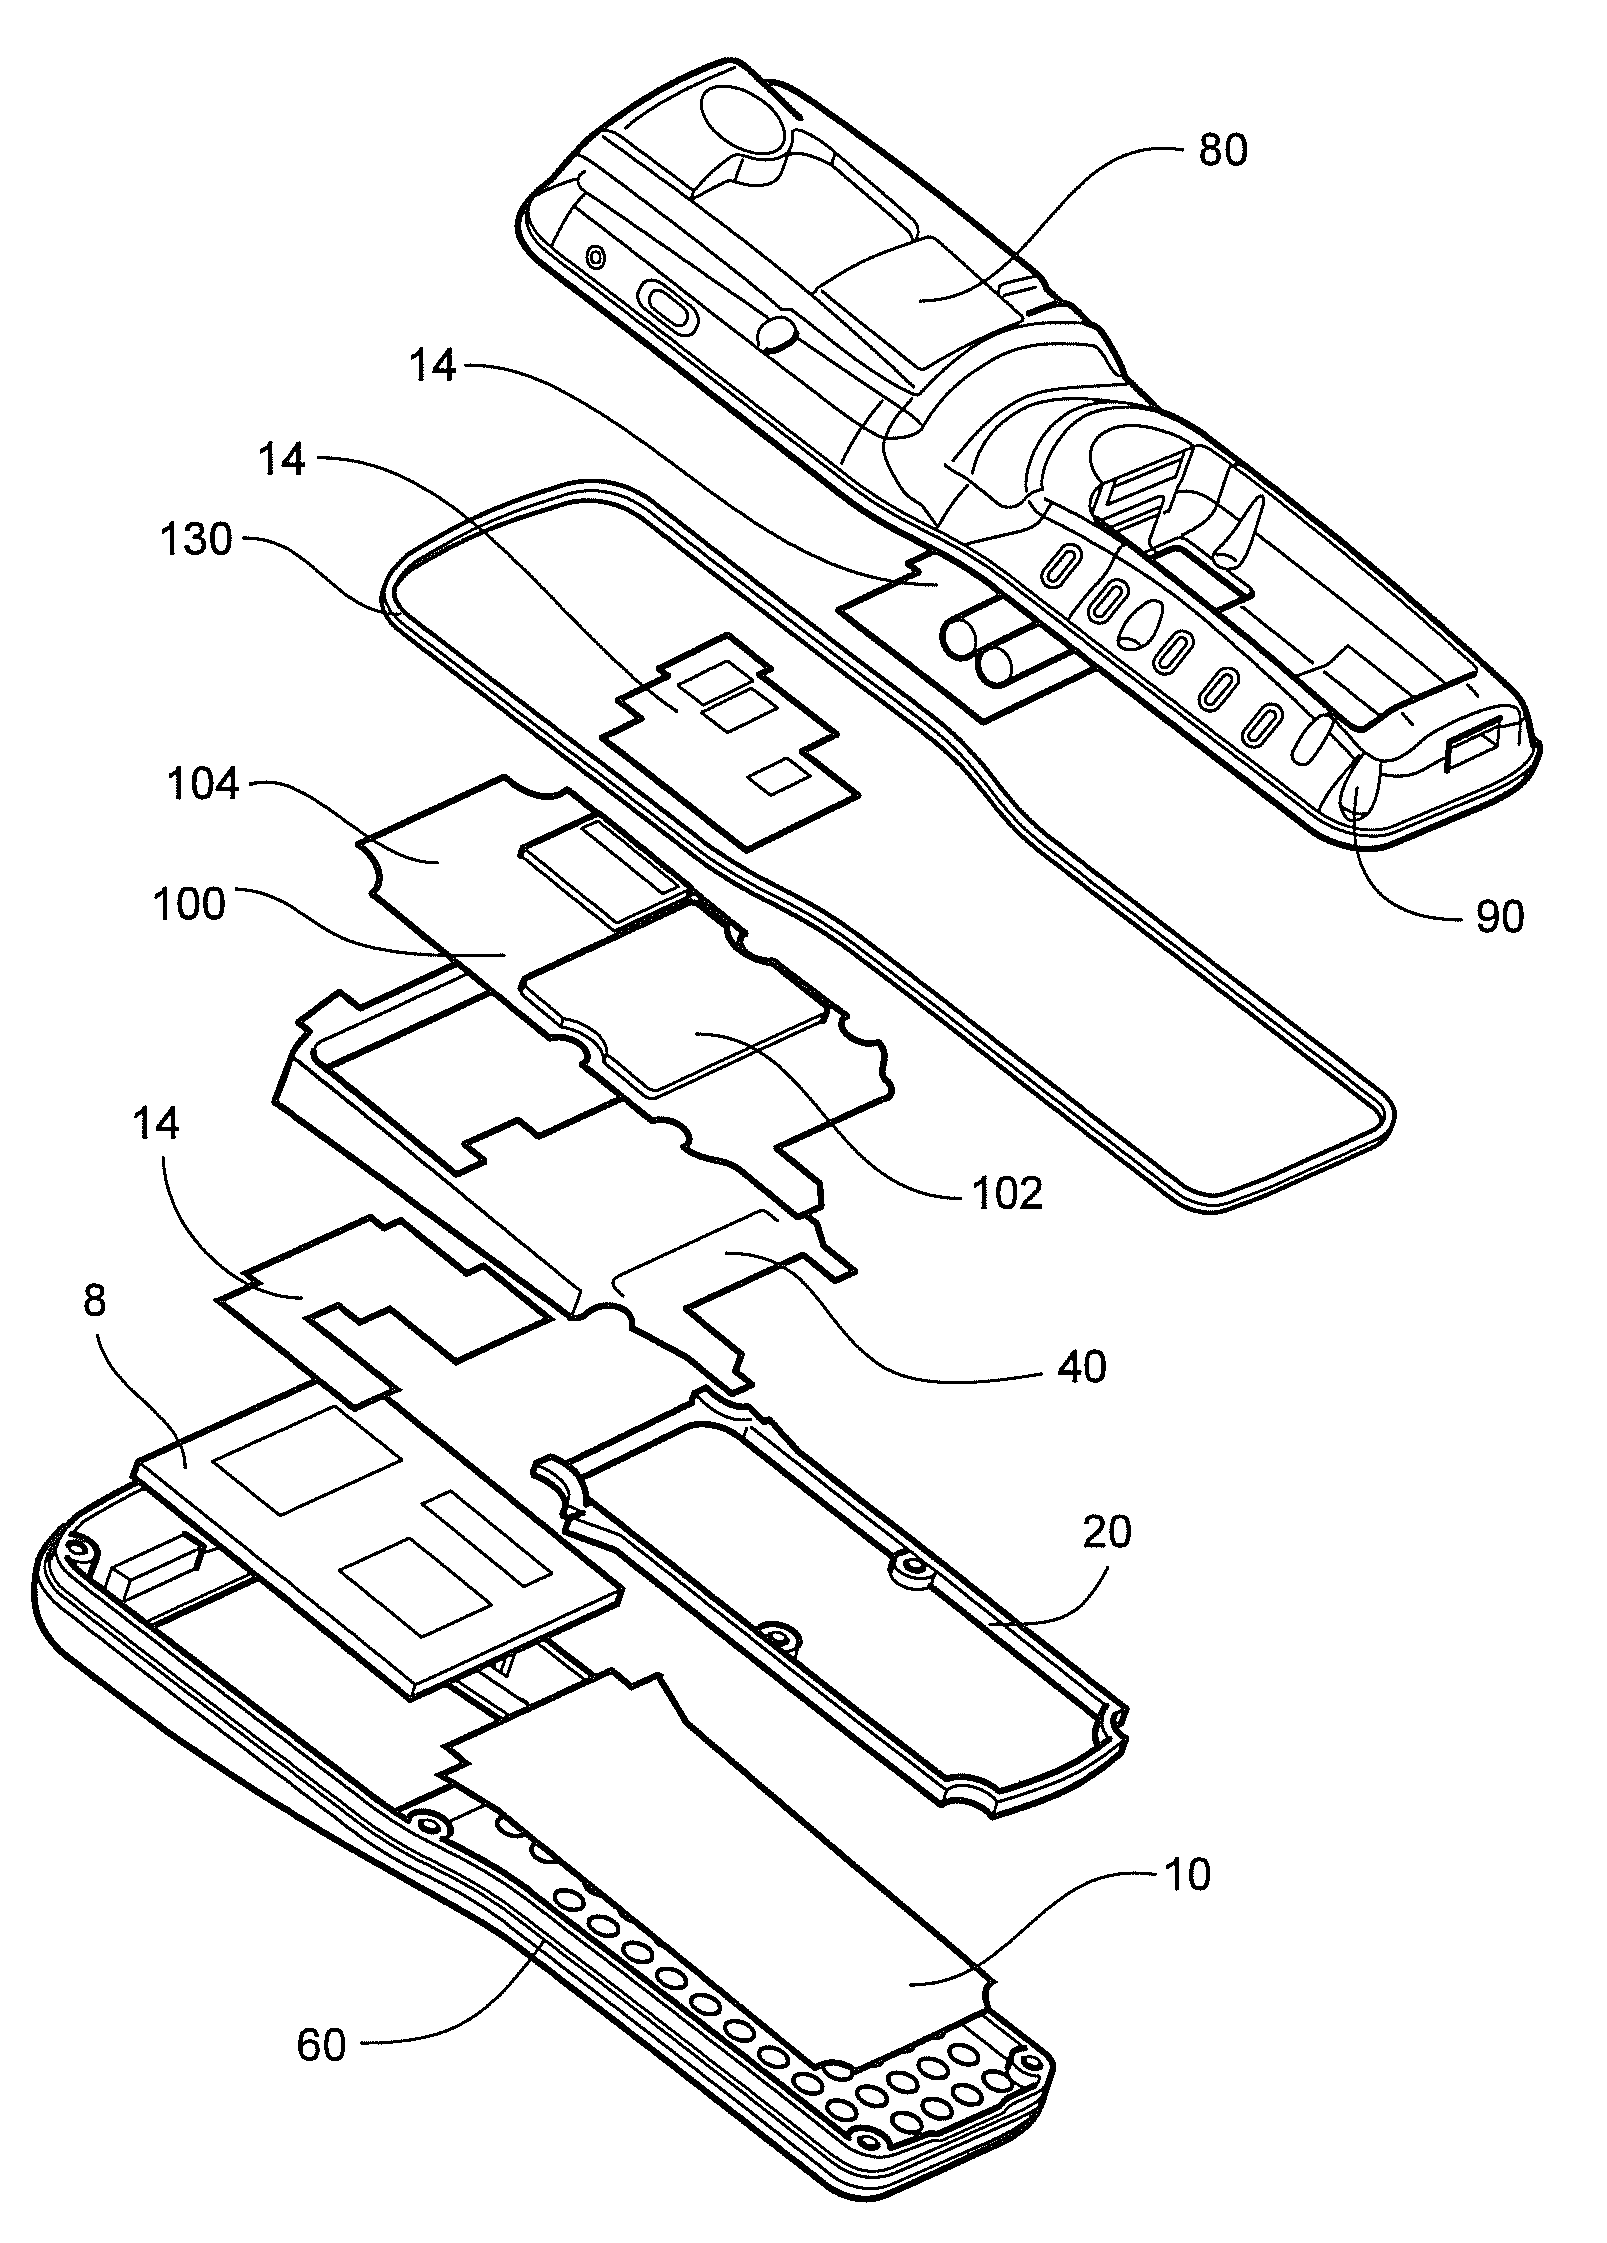 Portable data terminal internal support structure